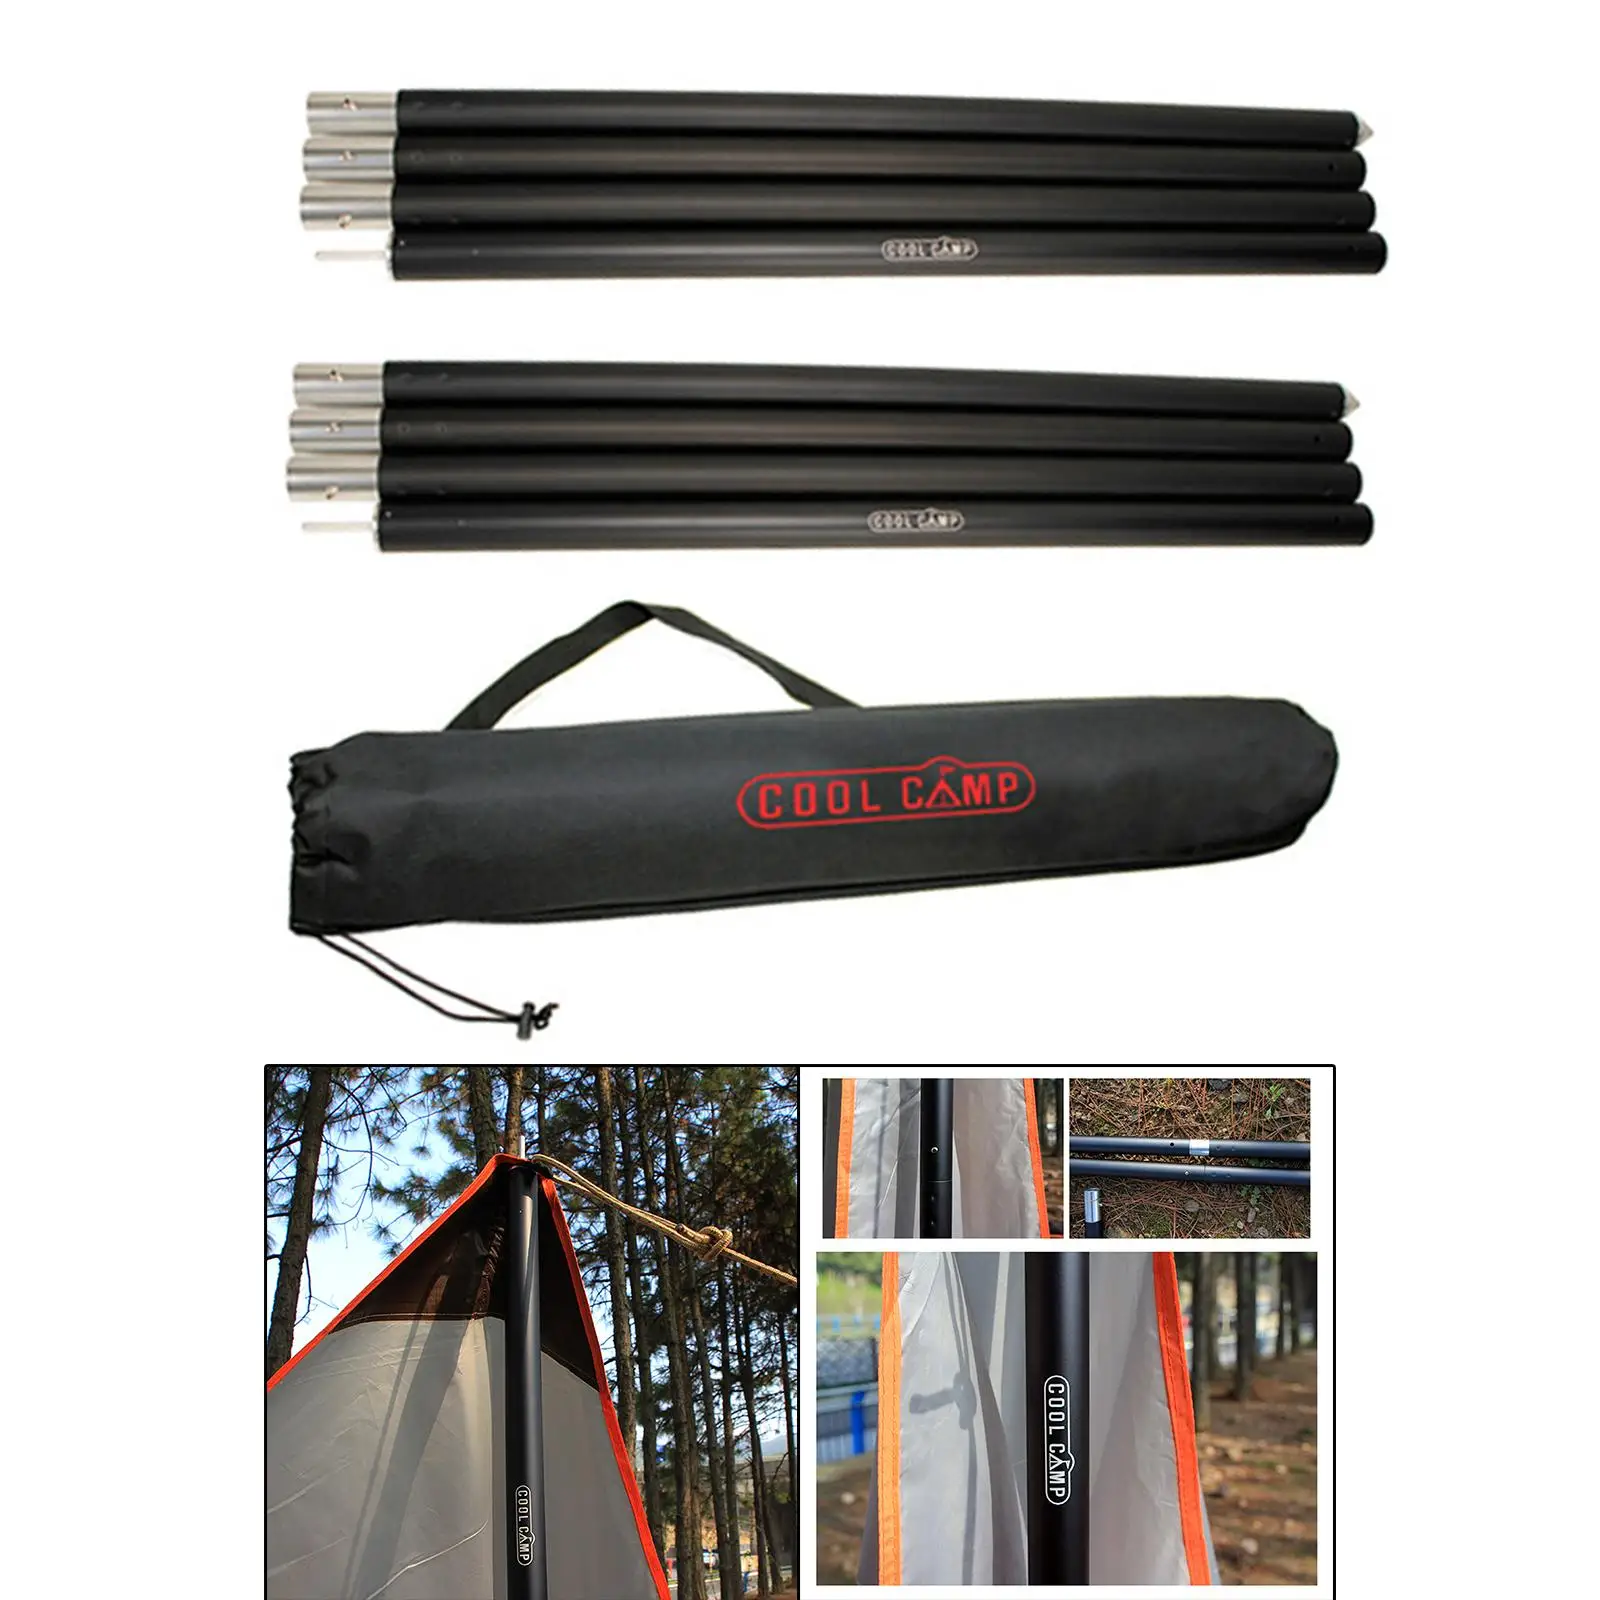  Tent Poles Replacement Aluminum Rod  Fly Awning Canopy Versatile